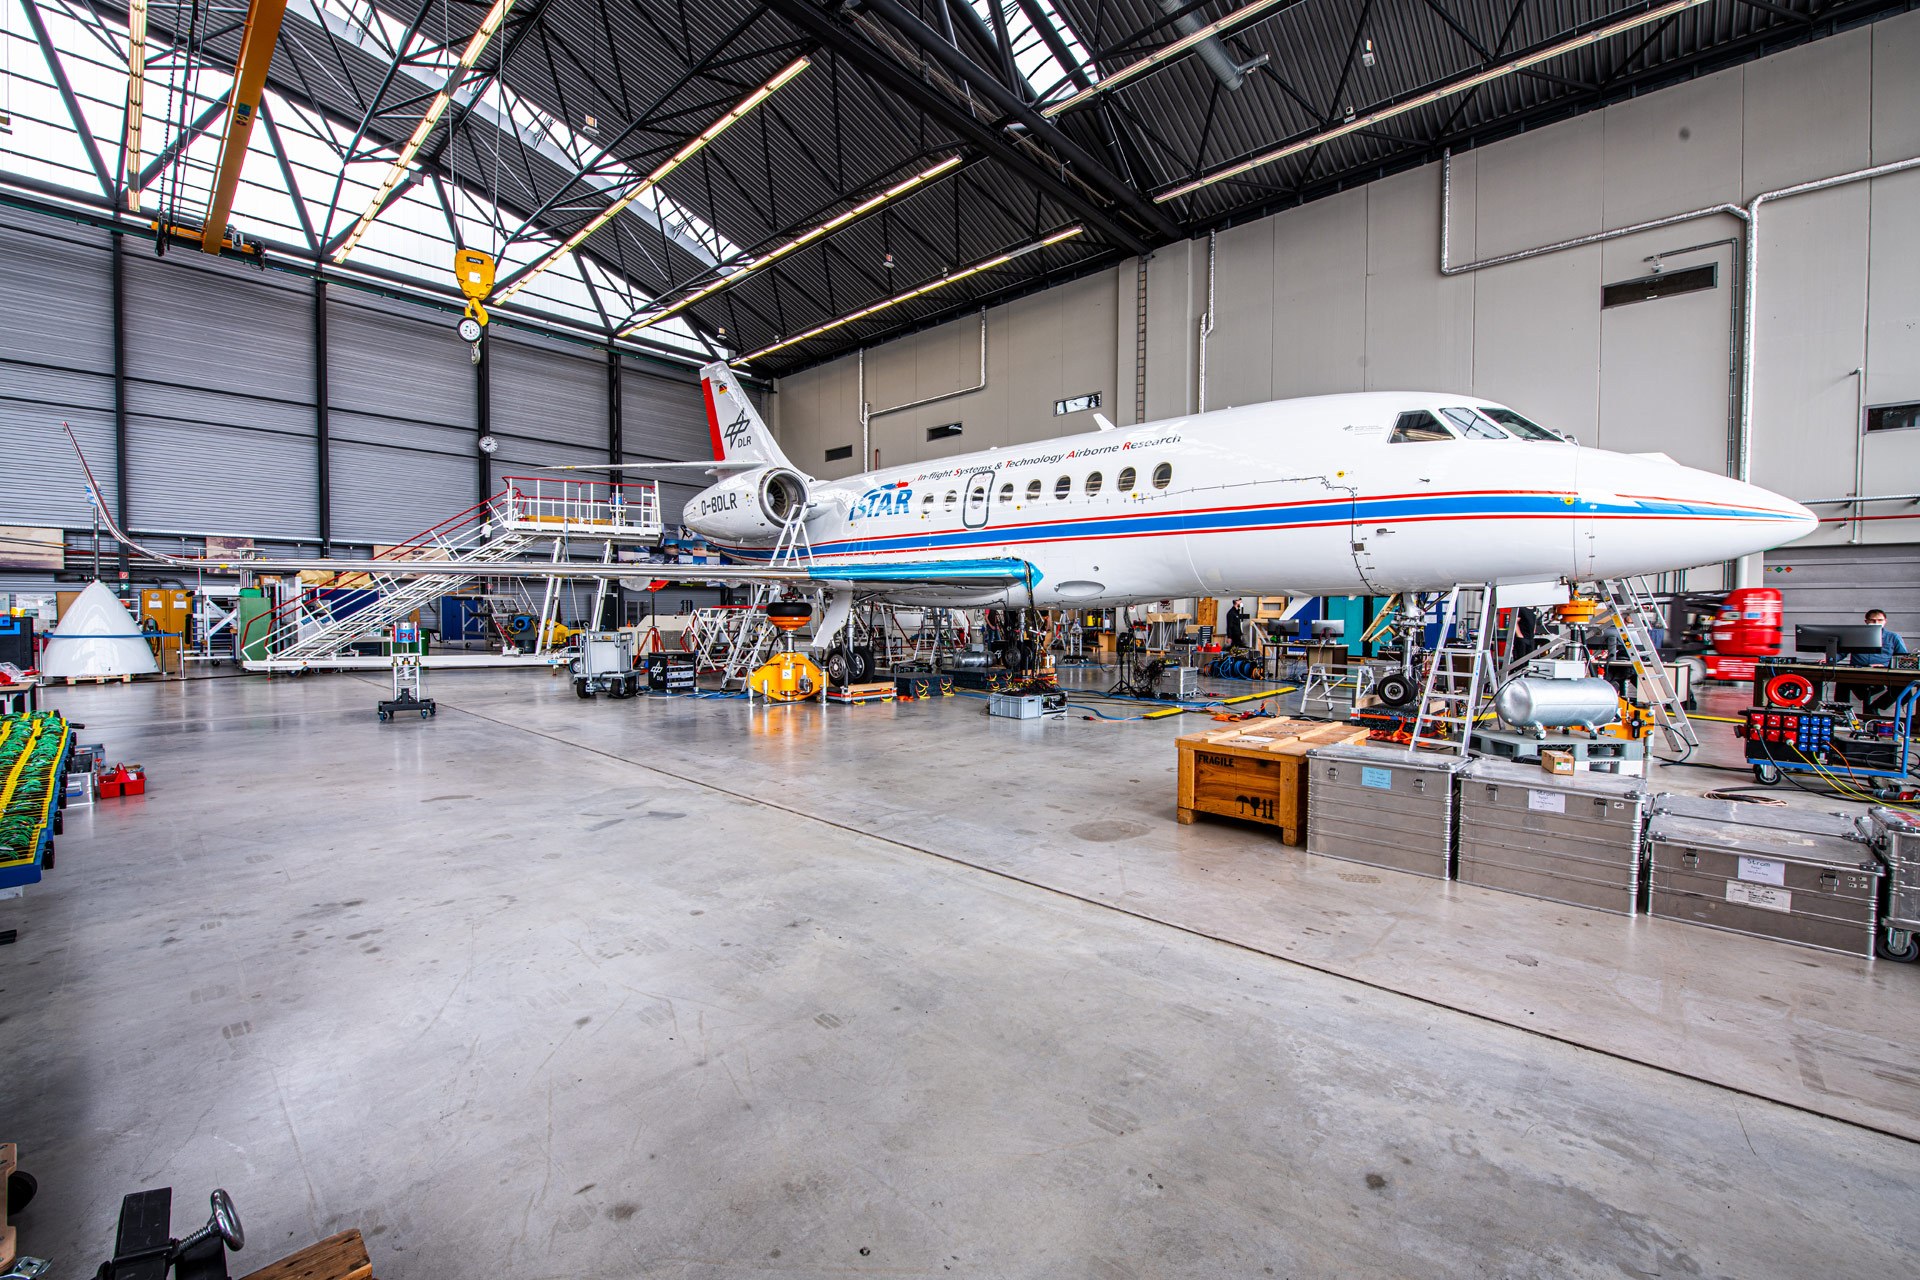 ISTAR during the ground vibration test in the hangar